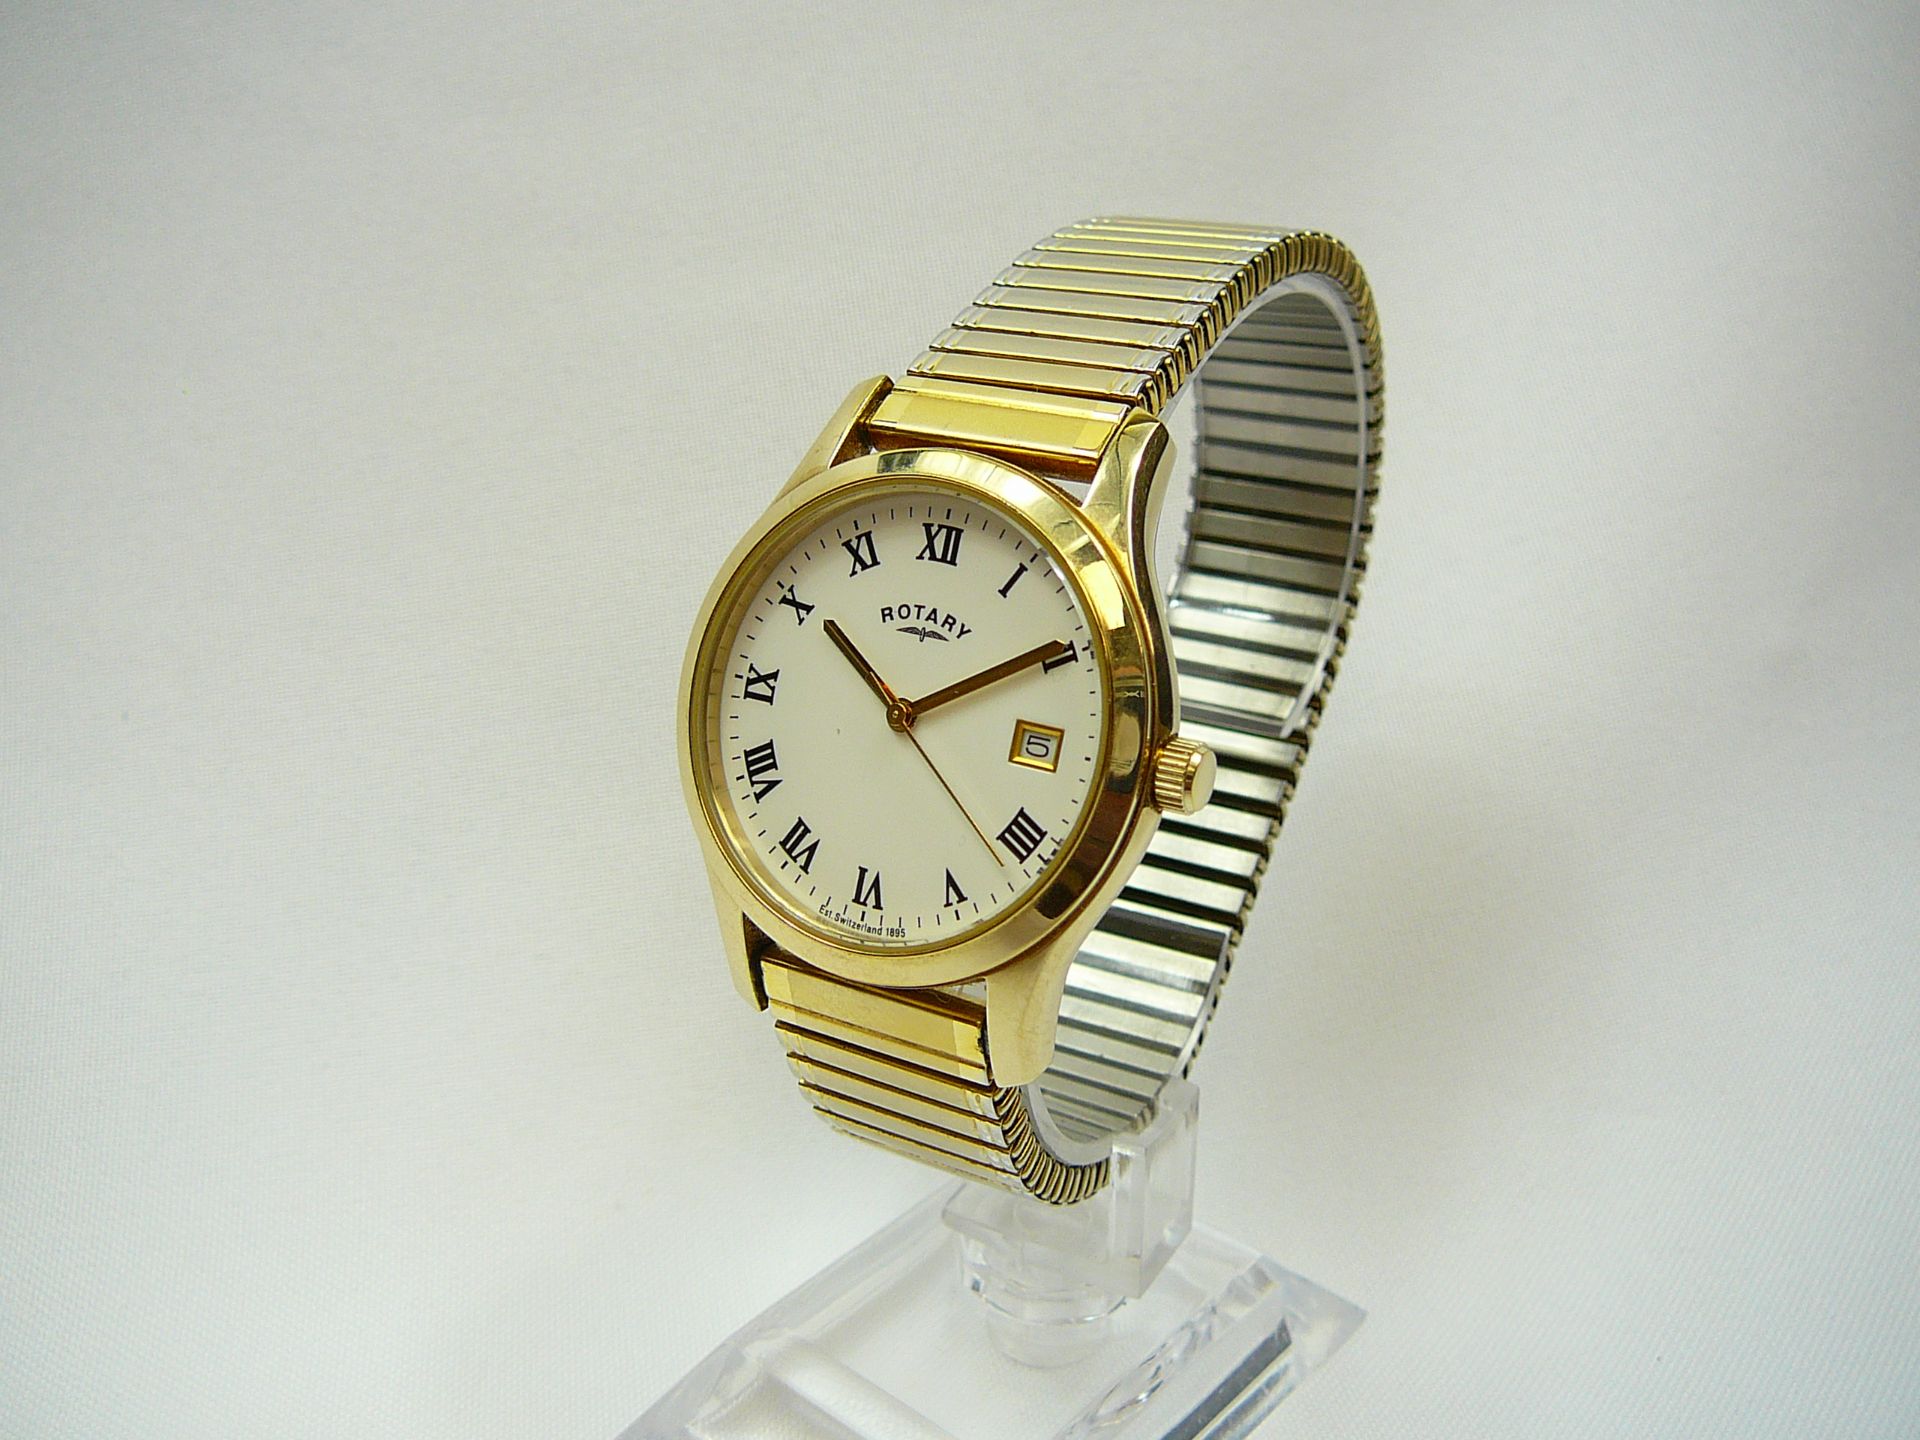 Gents Rotary Wristwatch - Image 2 of 3